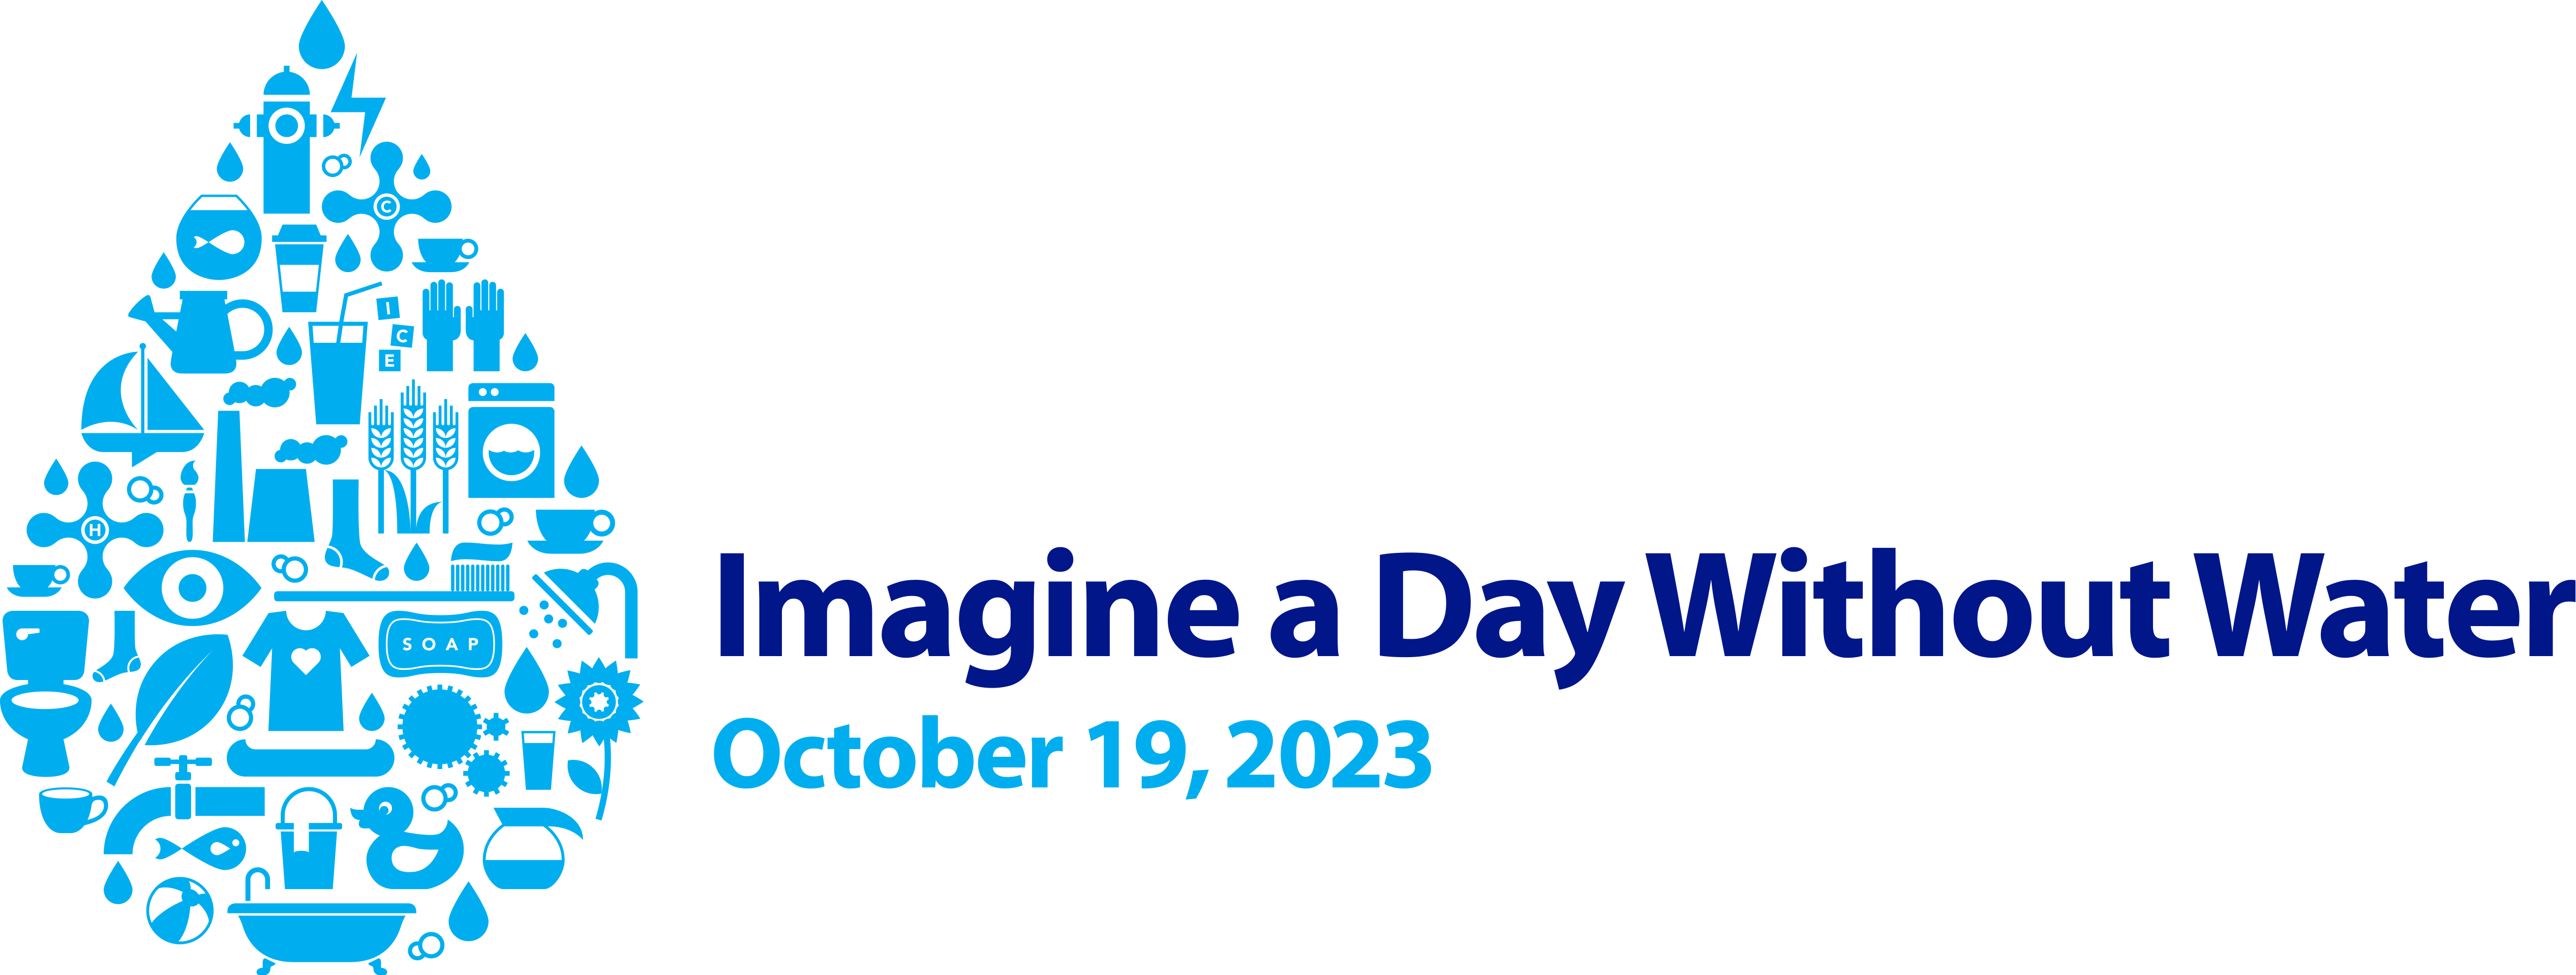 Imagine a Day Without Water 2023 Logo